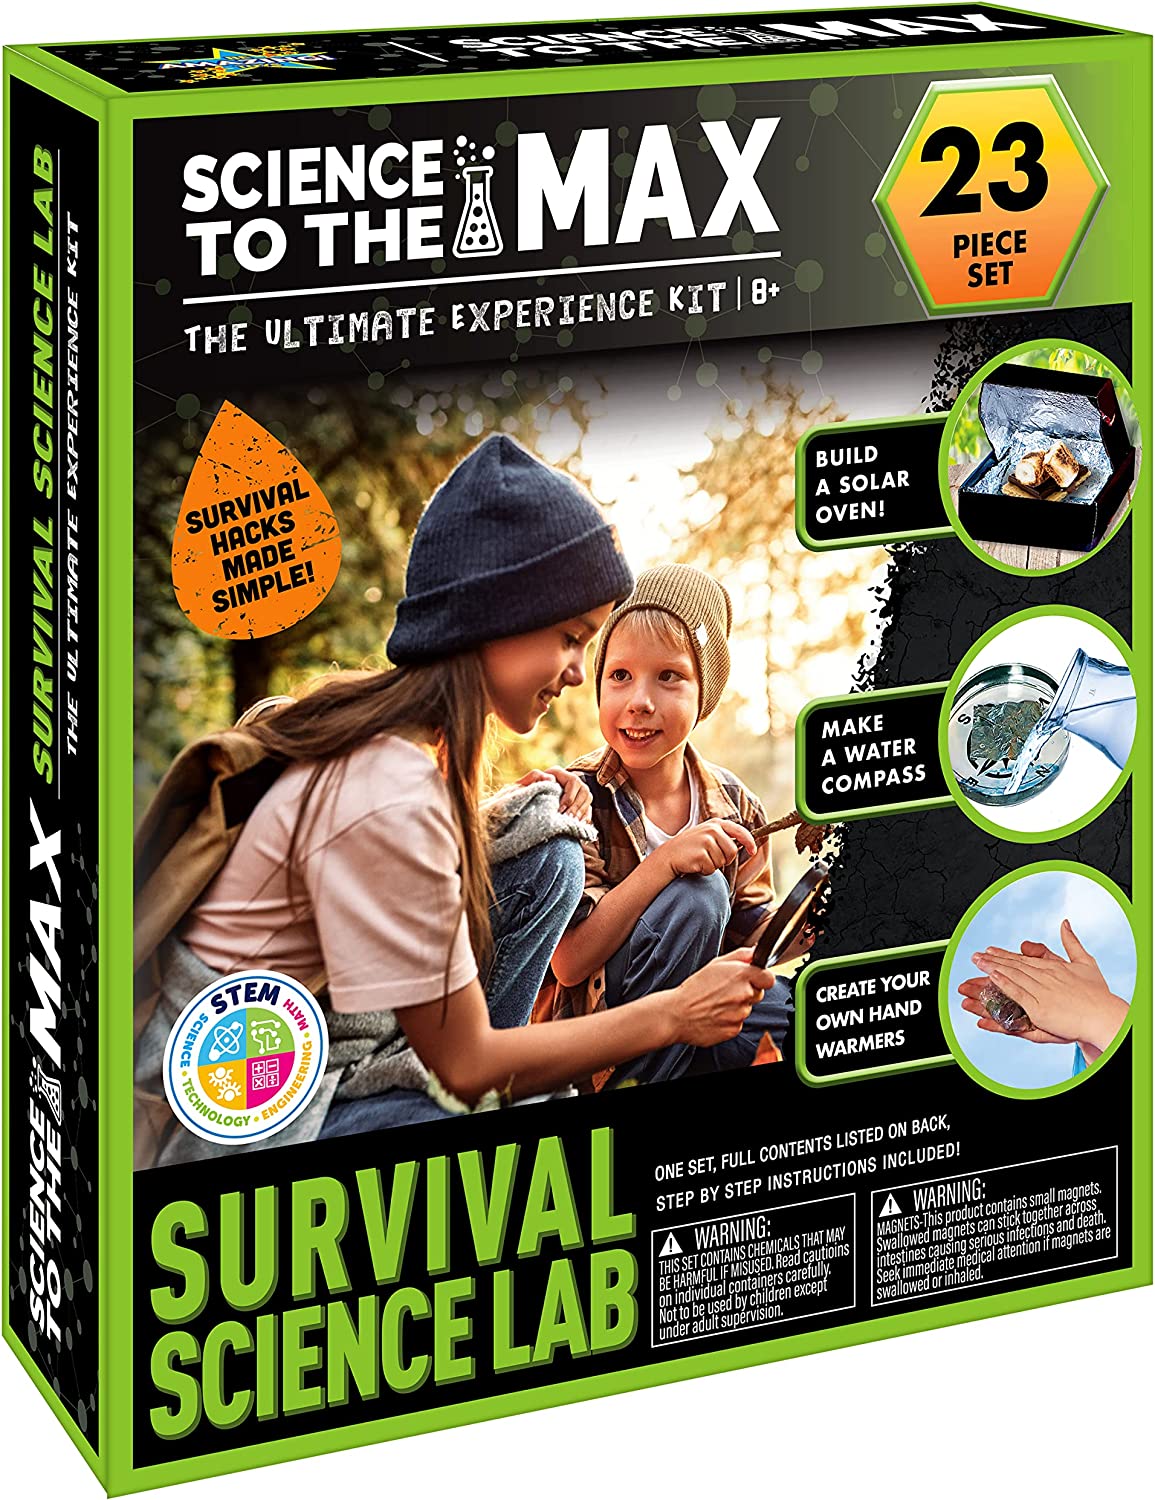 Be Amazing! Toys Survival Science Lab – Survival Kit for Kids – Educational Survival Camping Gear Experiments for Boys and Girls – Make Your Own Compass Survival Tool – Science Kits for Kids – Ages 8+